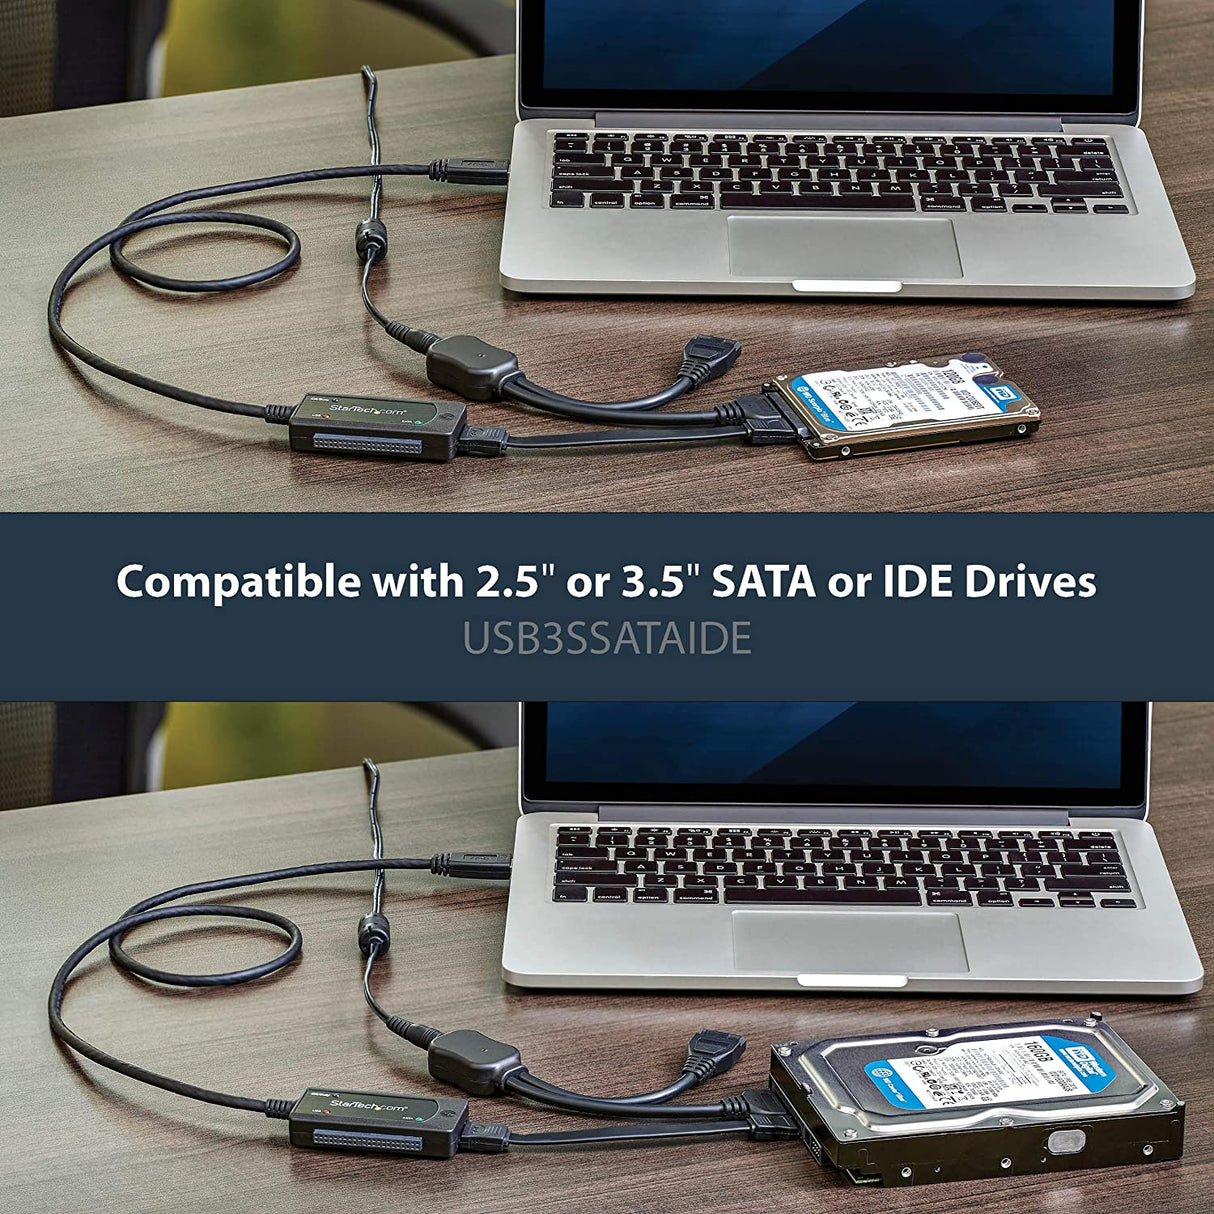  StarTech.com SATA to USB Cable - USB 3.0 to 2.5” SATA III Hard  Drive Adapter - External Converter for SSD/HDD Data Transfer (USB3S2SAT3CB)  : Electronics